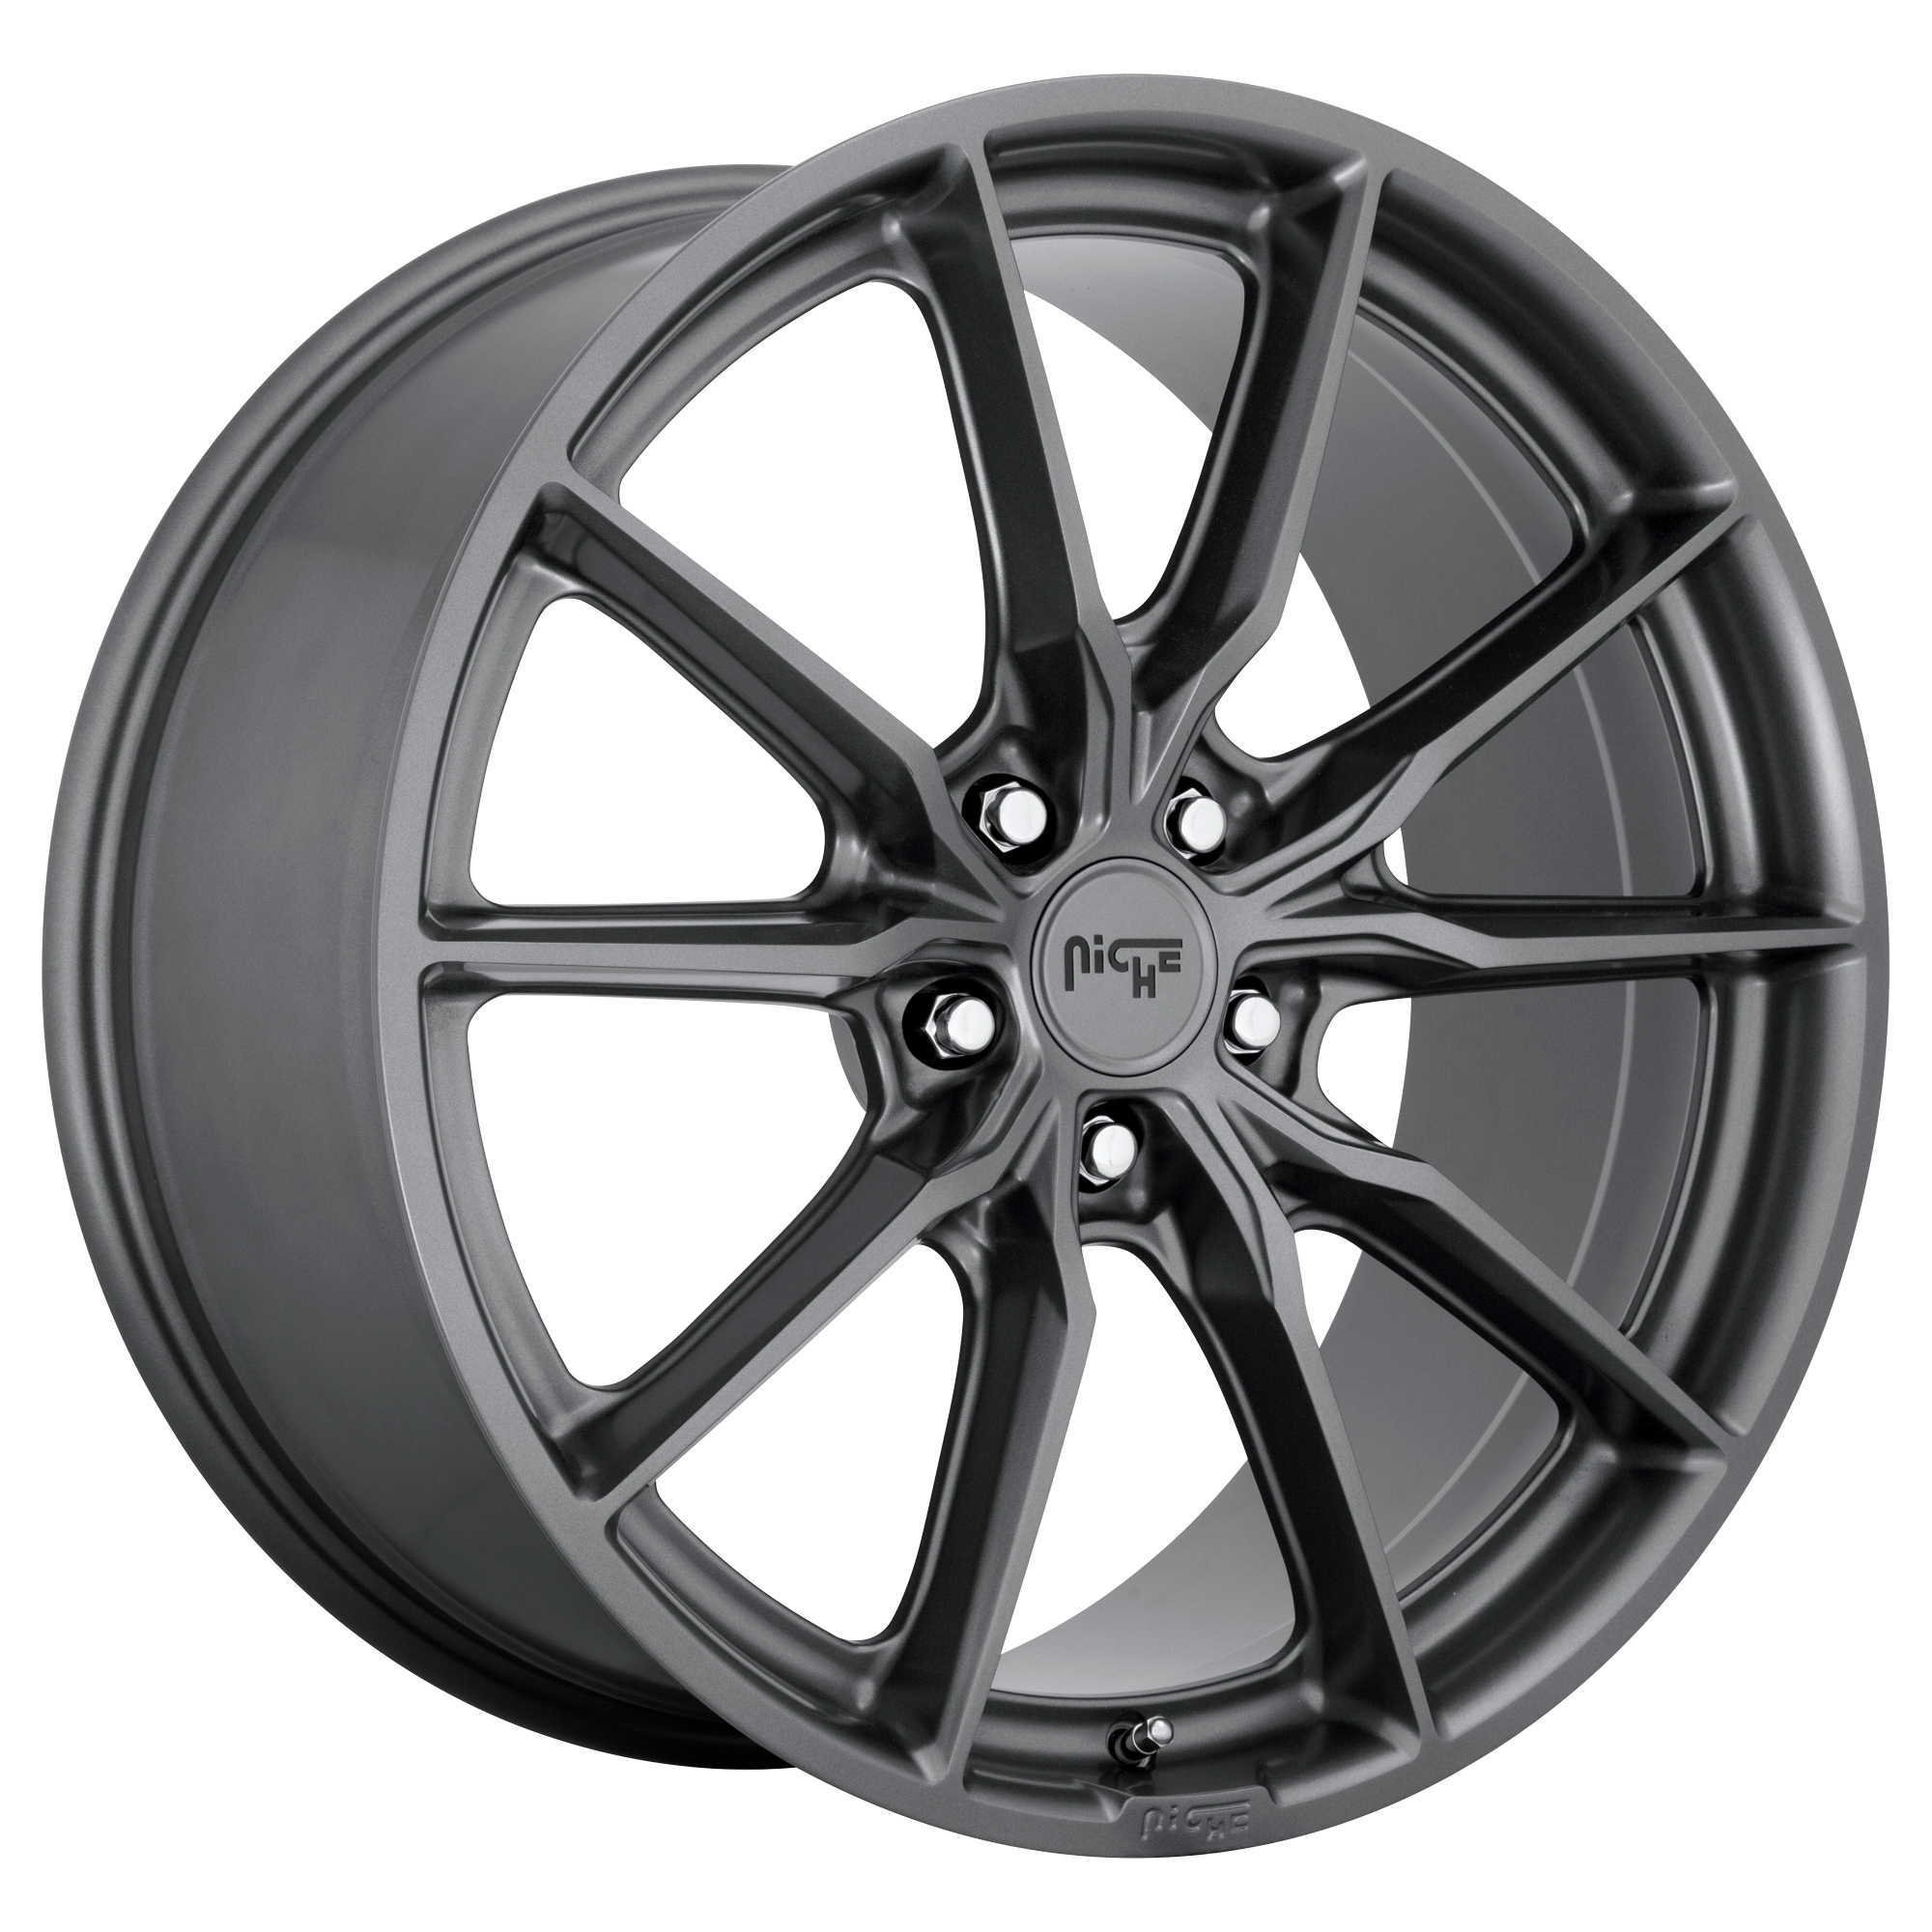 RAINIER 18x8 5x112.00 MATTE ANTHRACITE (42 mm) - Tires and Engine Performance